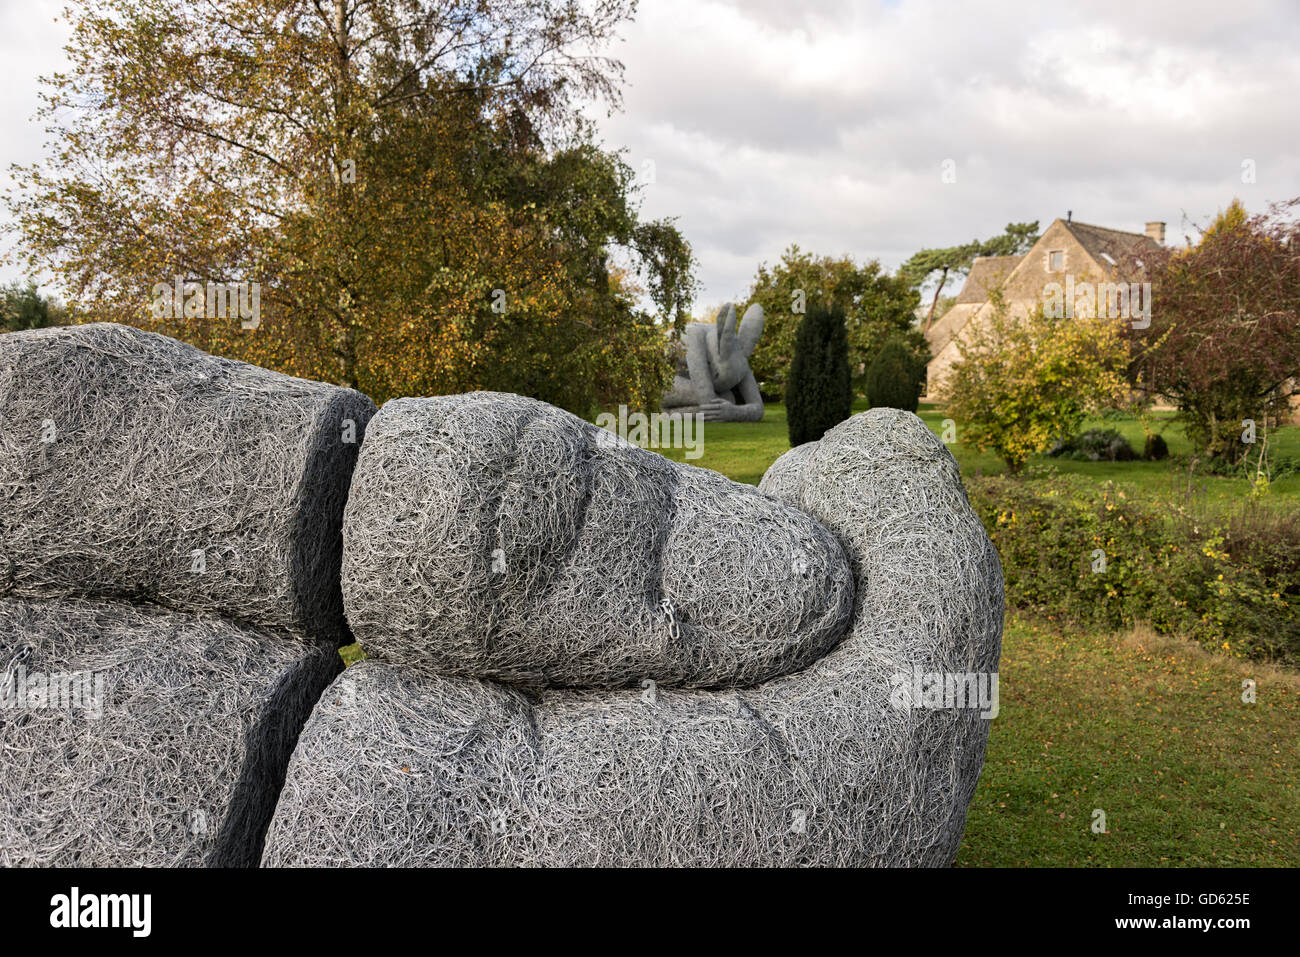 Large sculpture of a hand by Sophie ryder on garden lawn Stock Photo